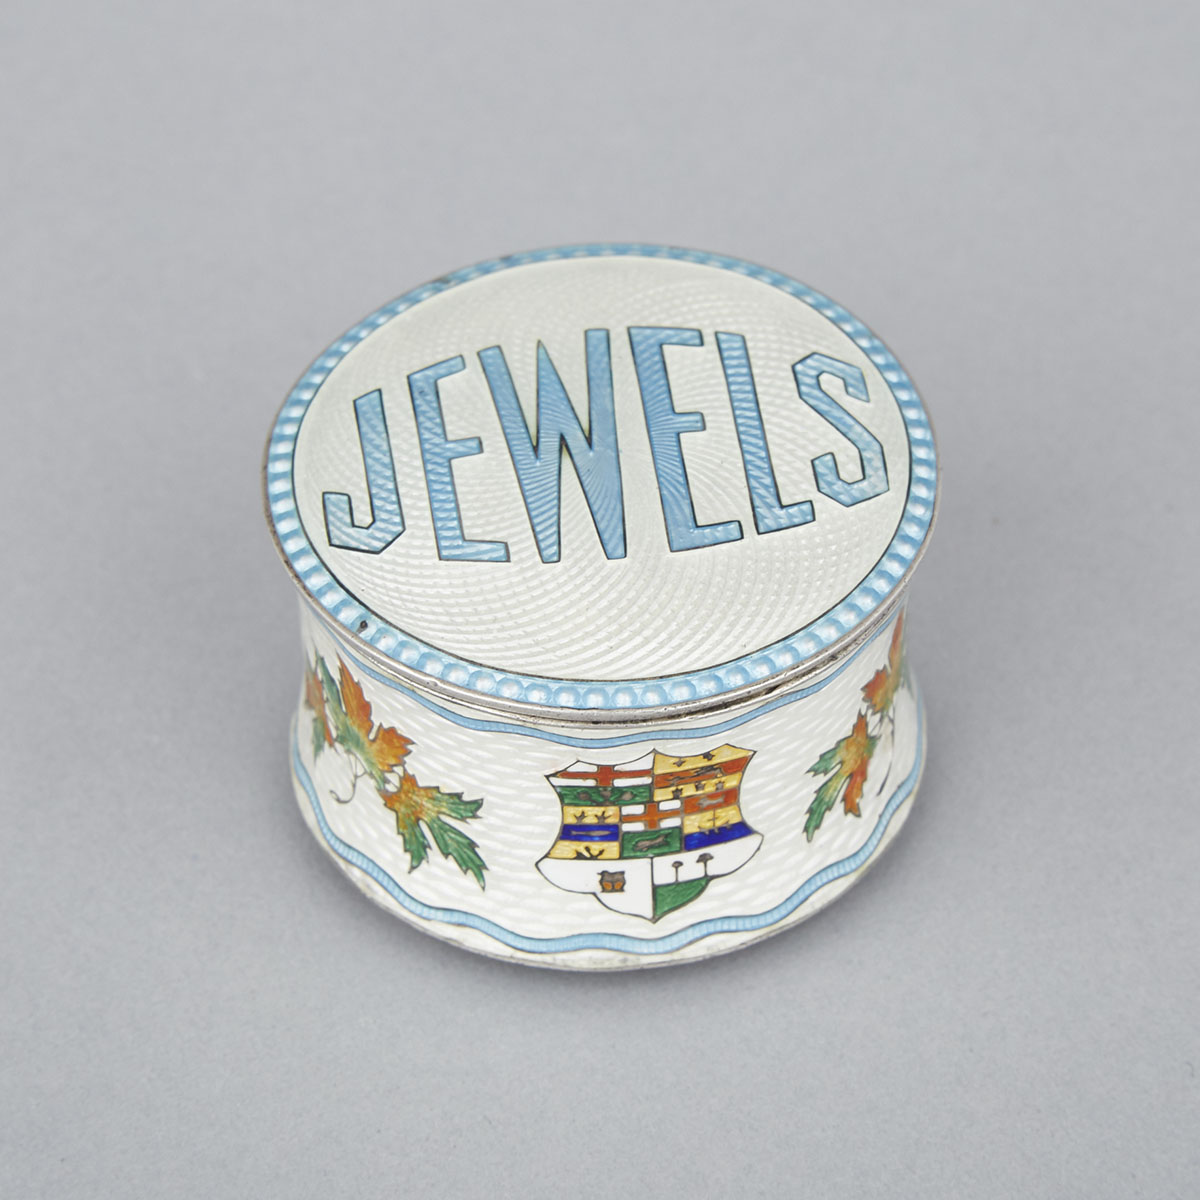 Canadian Silver and Enamel Jewel Box, early 20th century